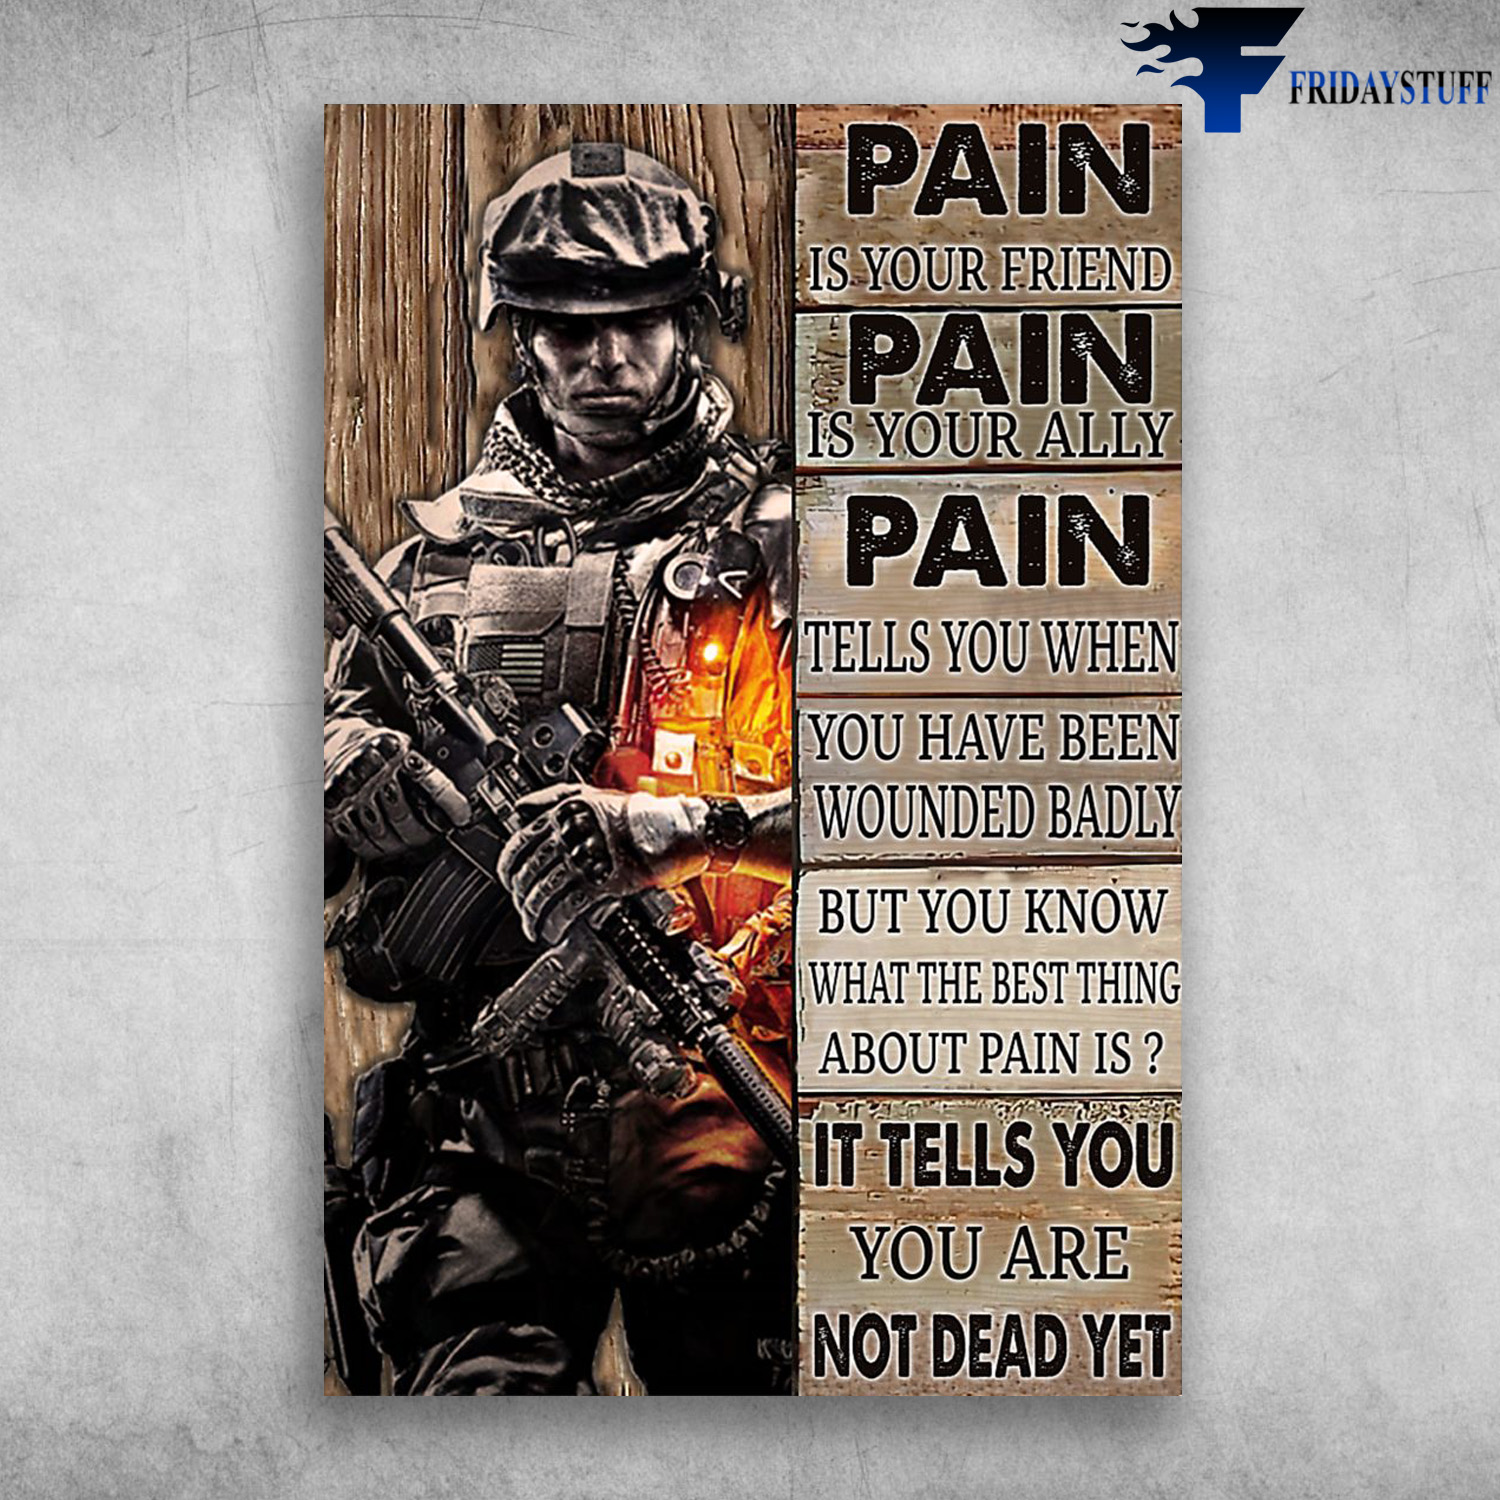 Special Forces - Pain Is Your Friend, Pain Is Your Ally, Pain Tells You When You Have Been Wounded Badly, But You Know What The Best Thing About Pain Is, It Tell You, You Are Not Dead Yet